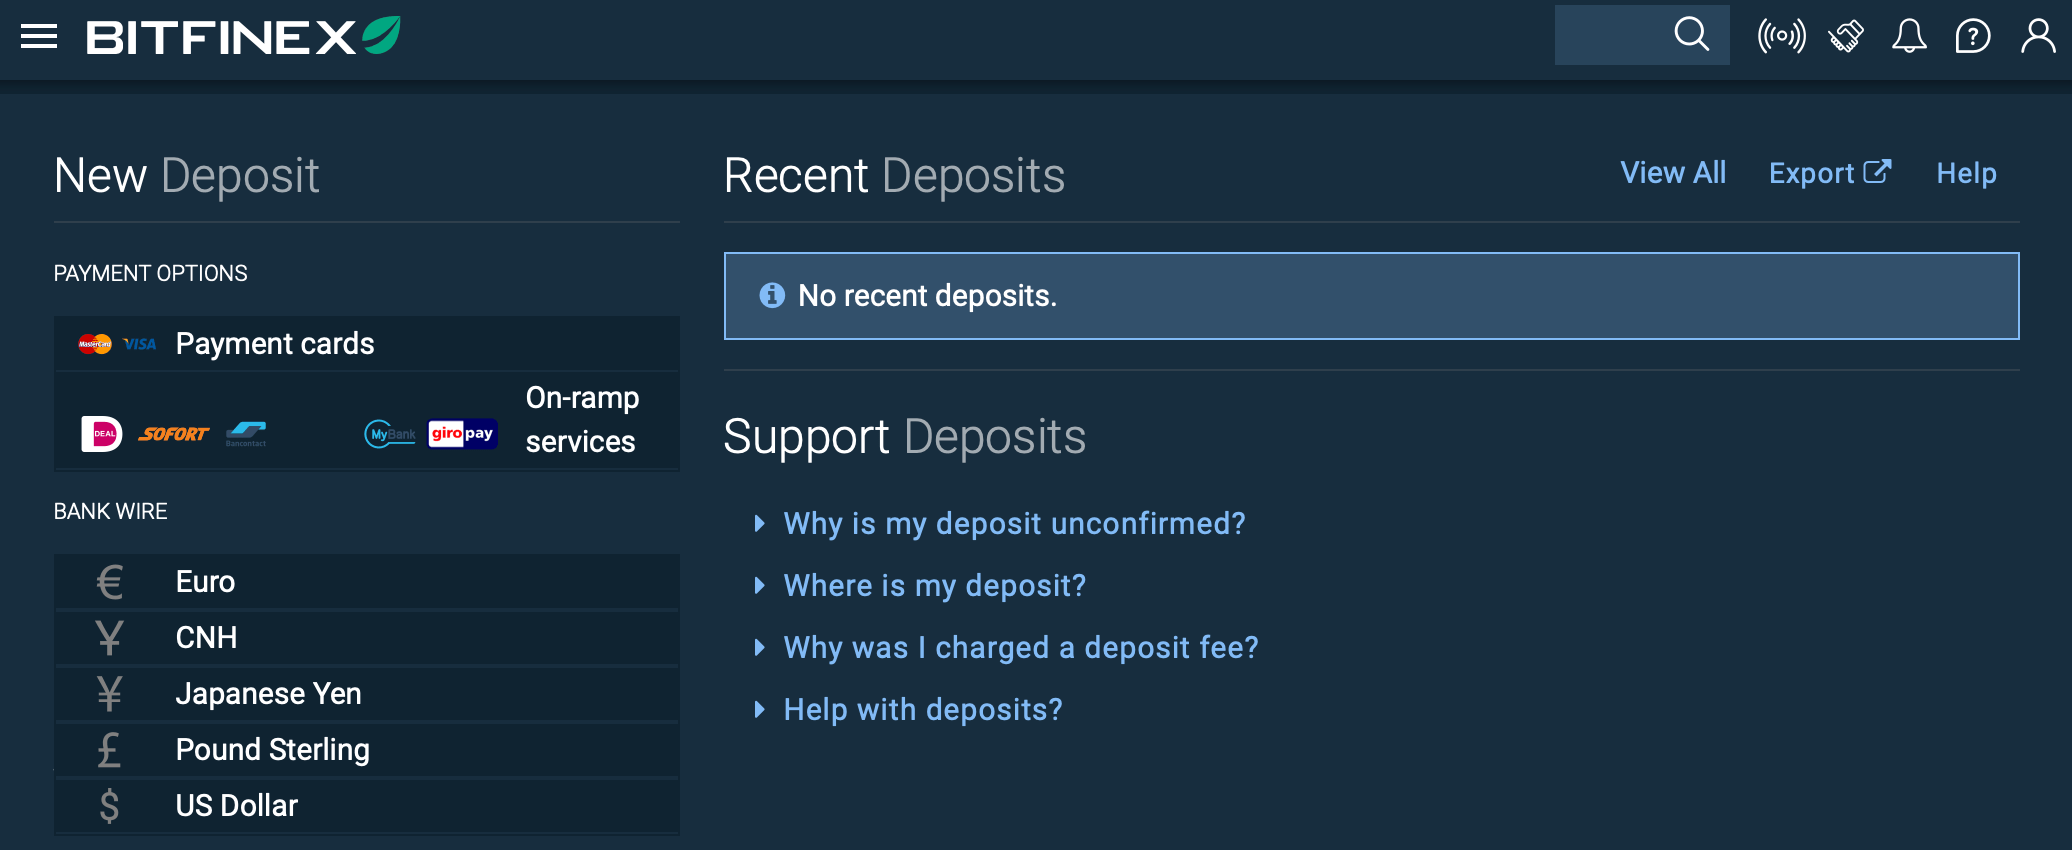 Deposit and withdrawal of funds on Bitfinex